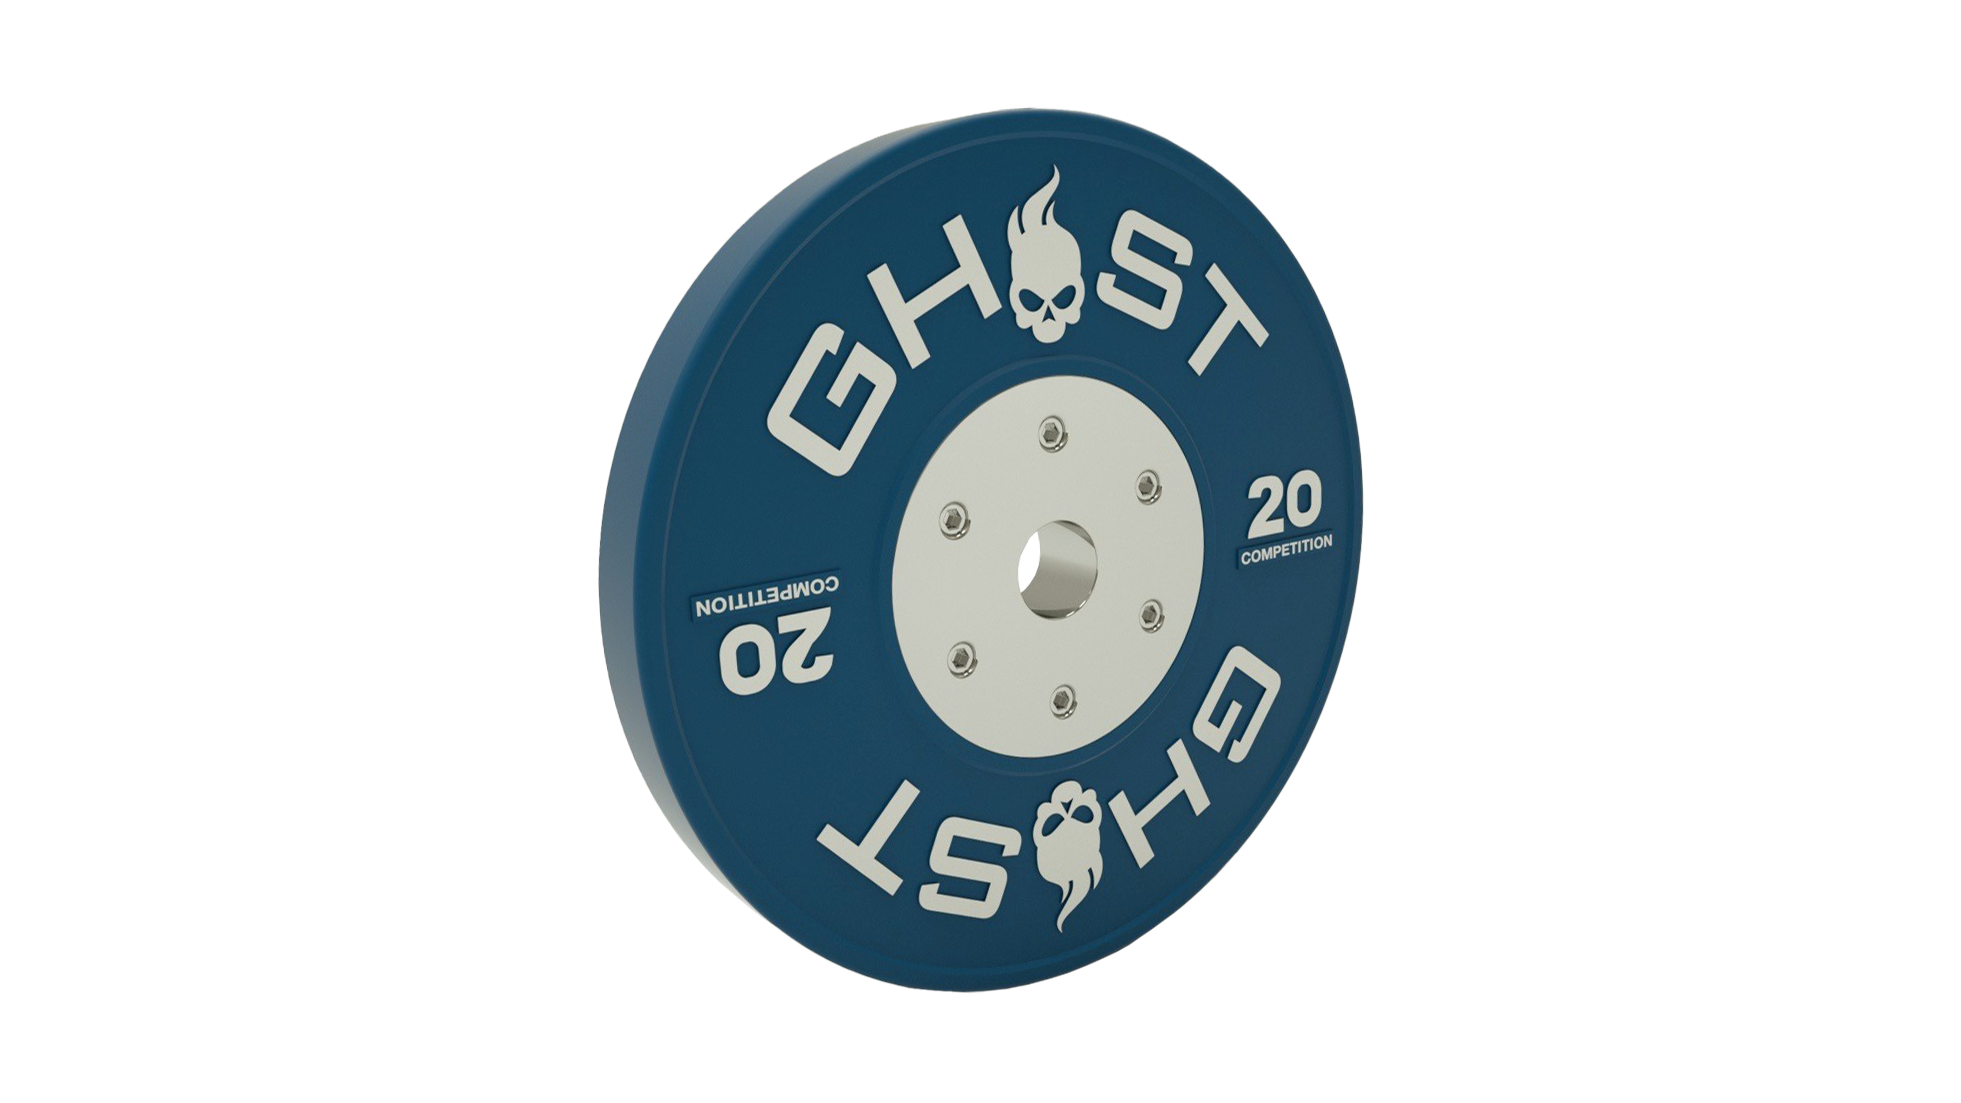 Ghost KG Competition Bumpers